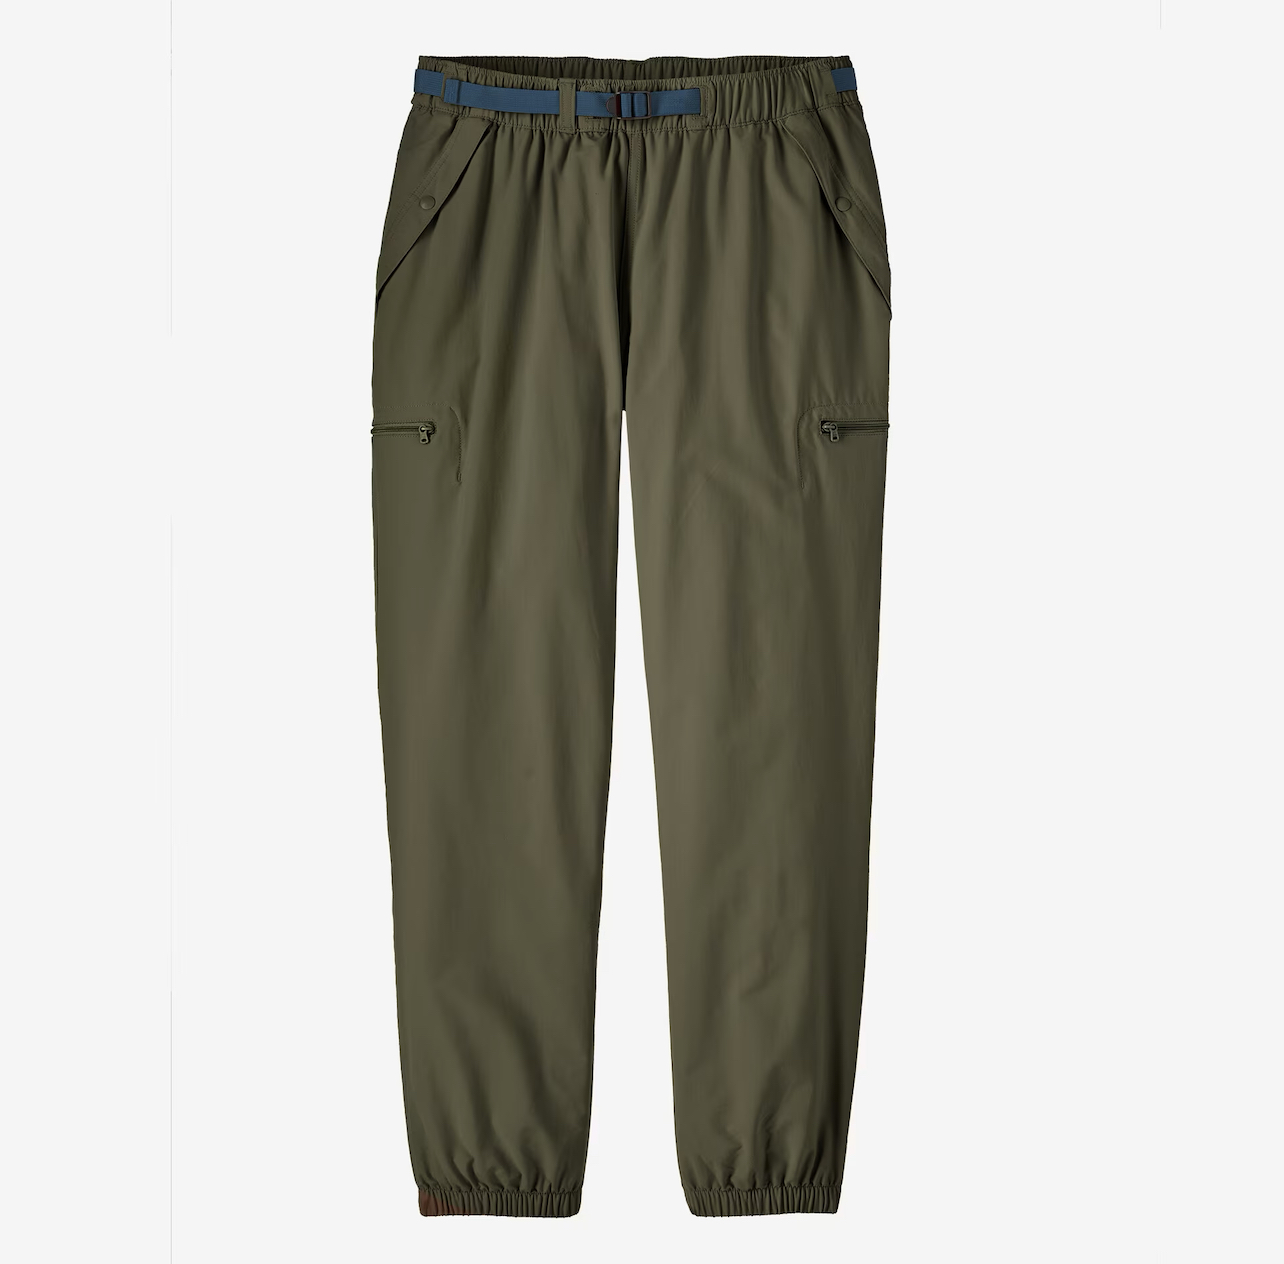 Patagonia M's Outdoor Everyday Pants - Basin Green - XL